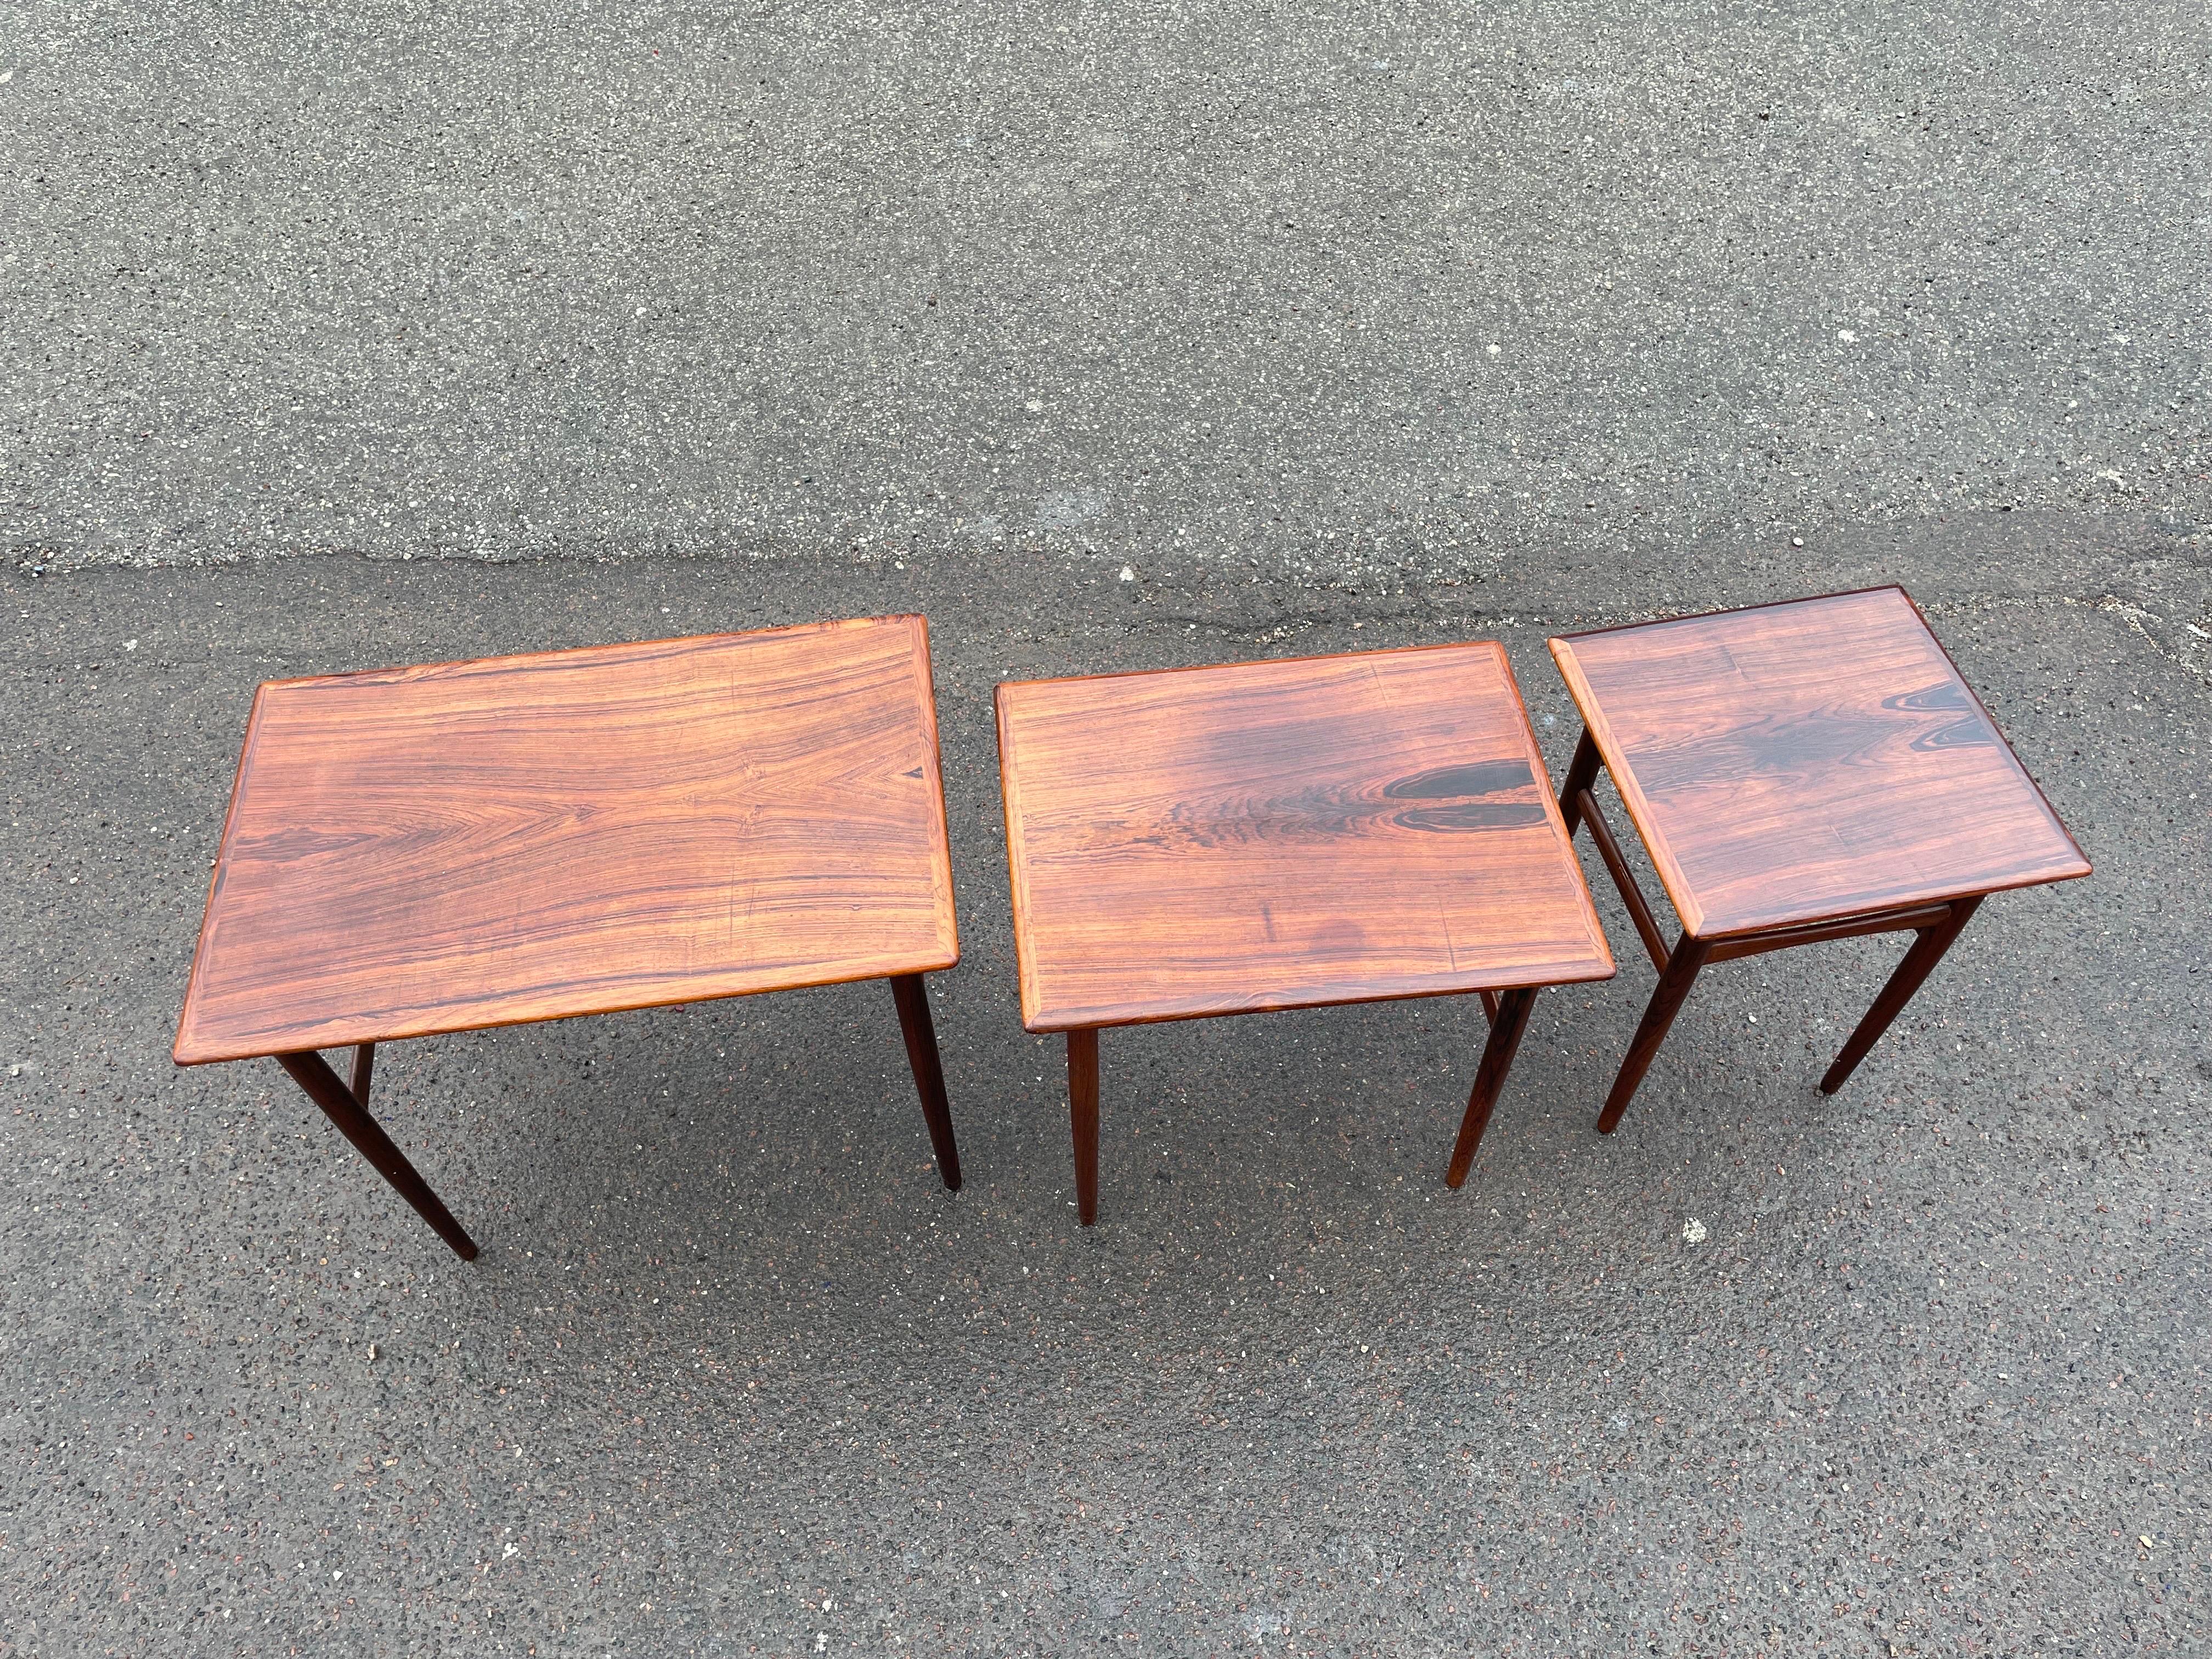 Wood Danish Mid-Century Modern Rosewood Nesting Tables from the 1960’s